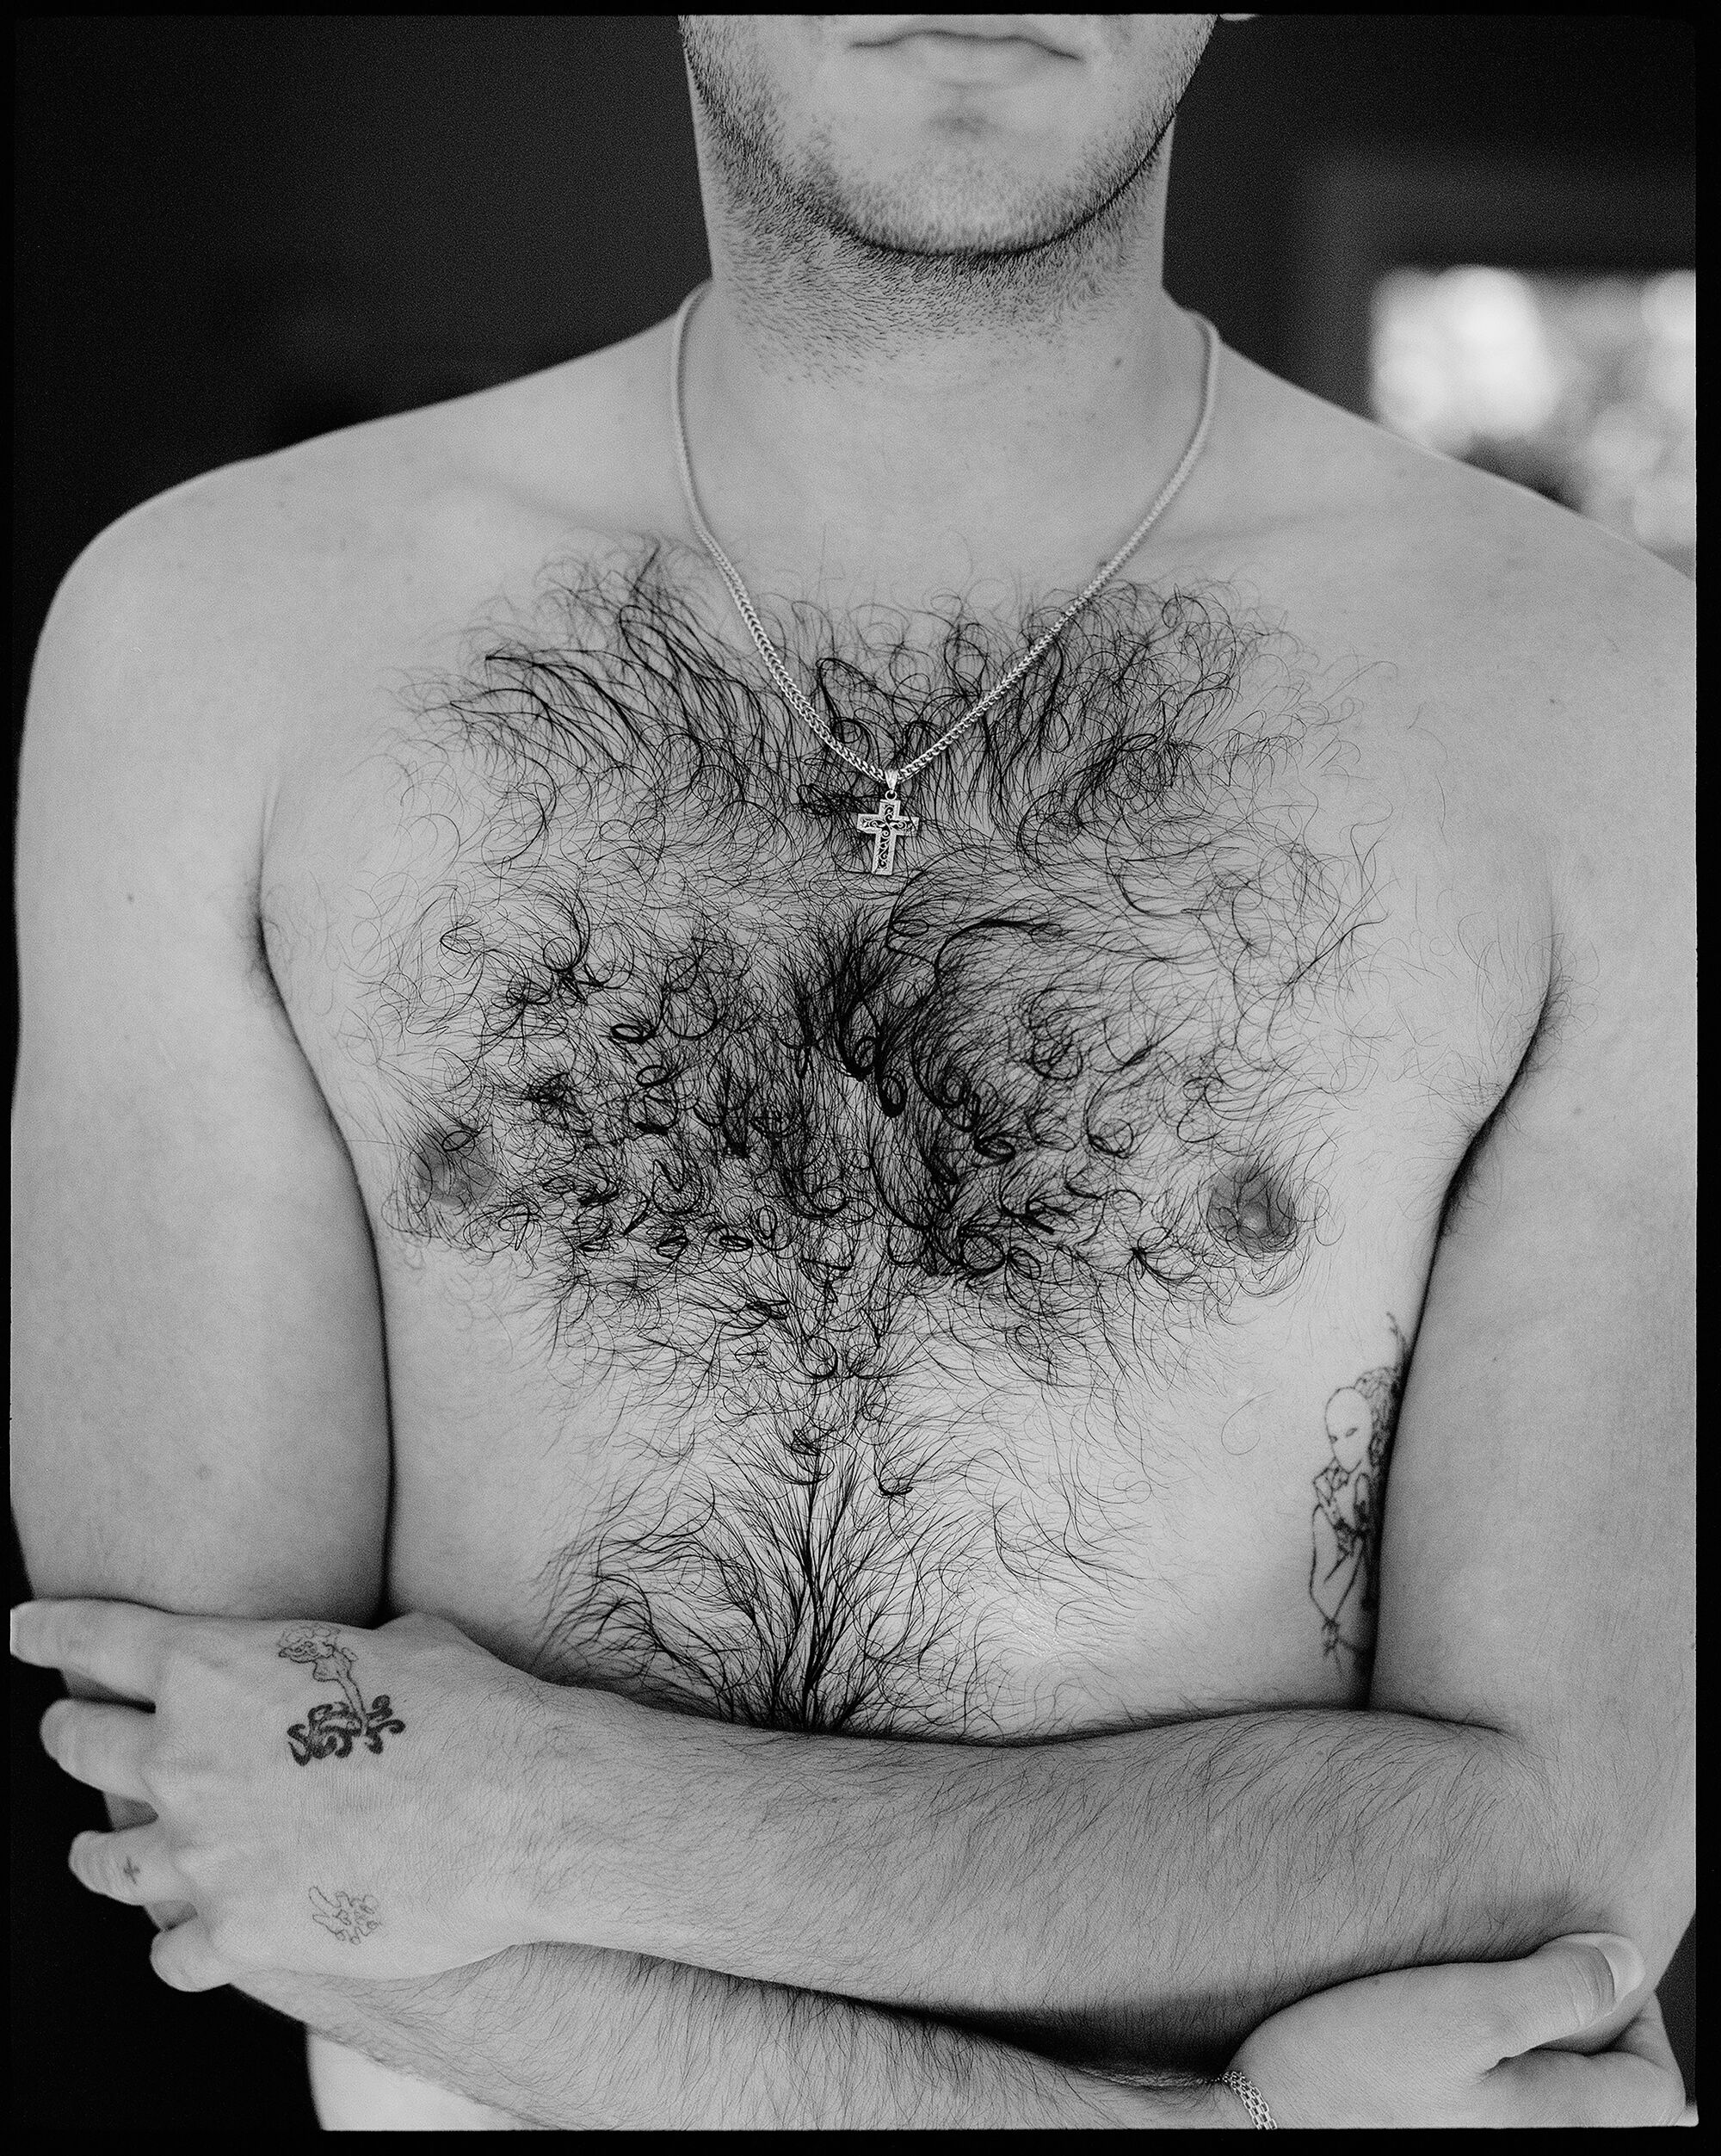 The hairy torso of a bare-chested man with crossed arms.